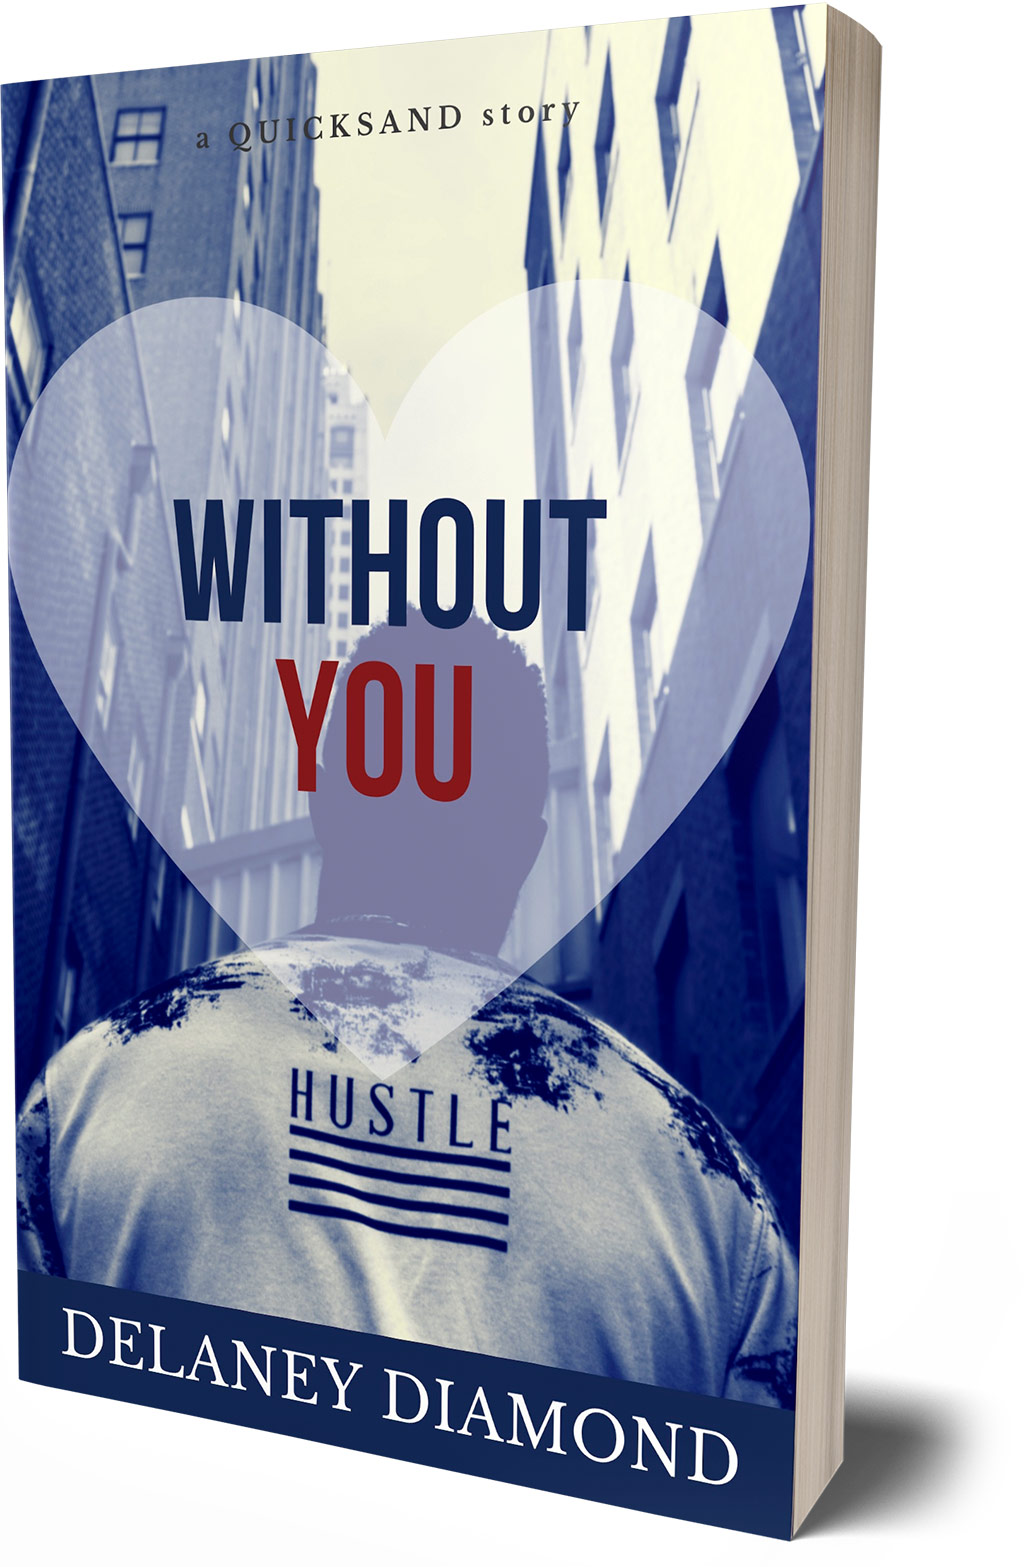 Without You, Quicksand Series Book 2, by Delaney Diamond